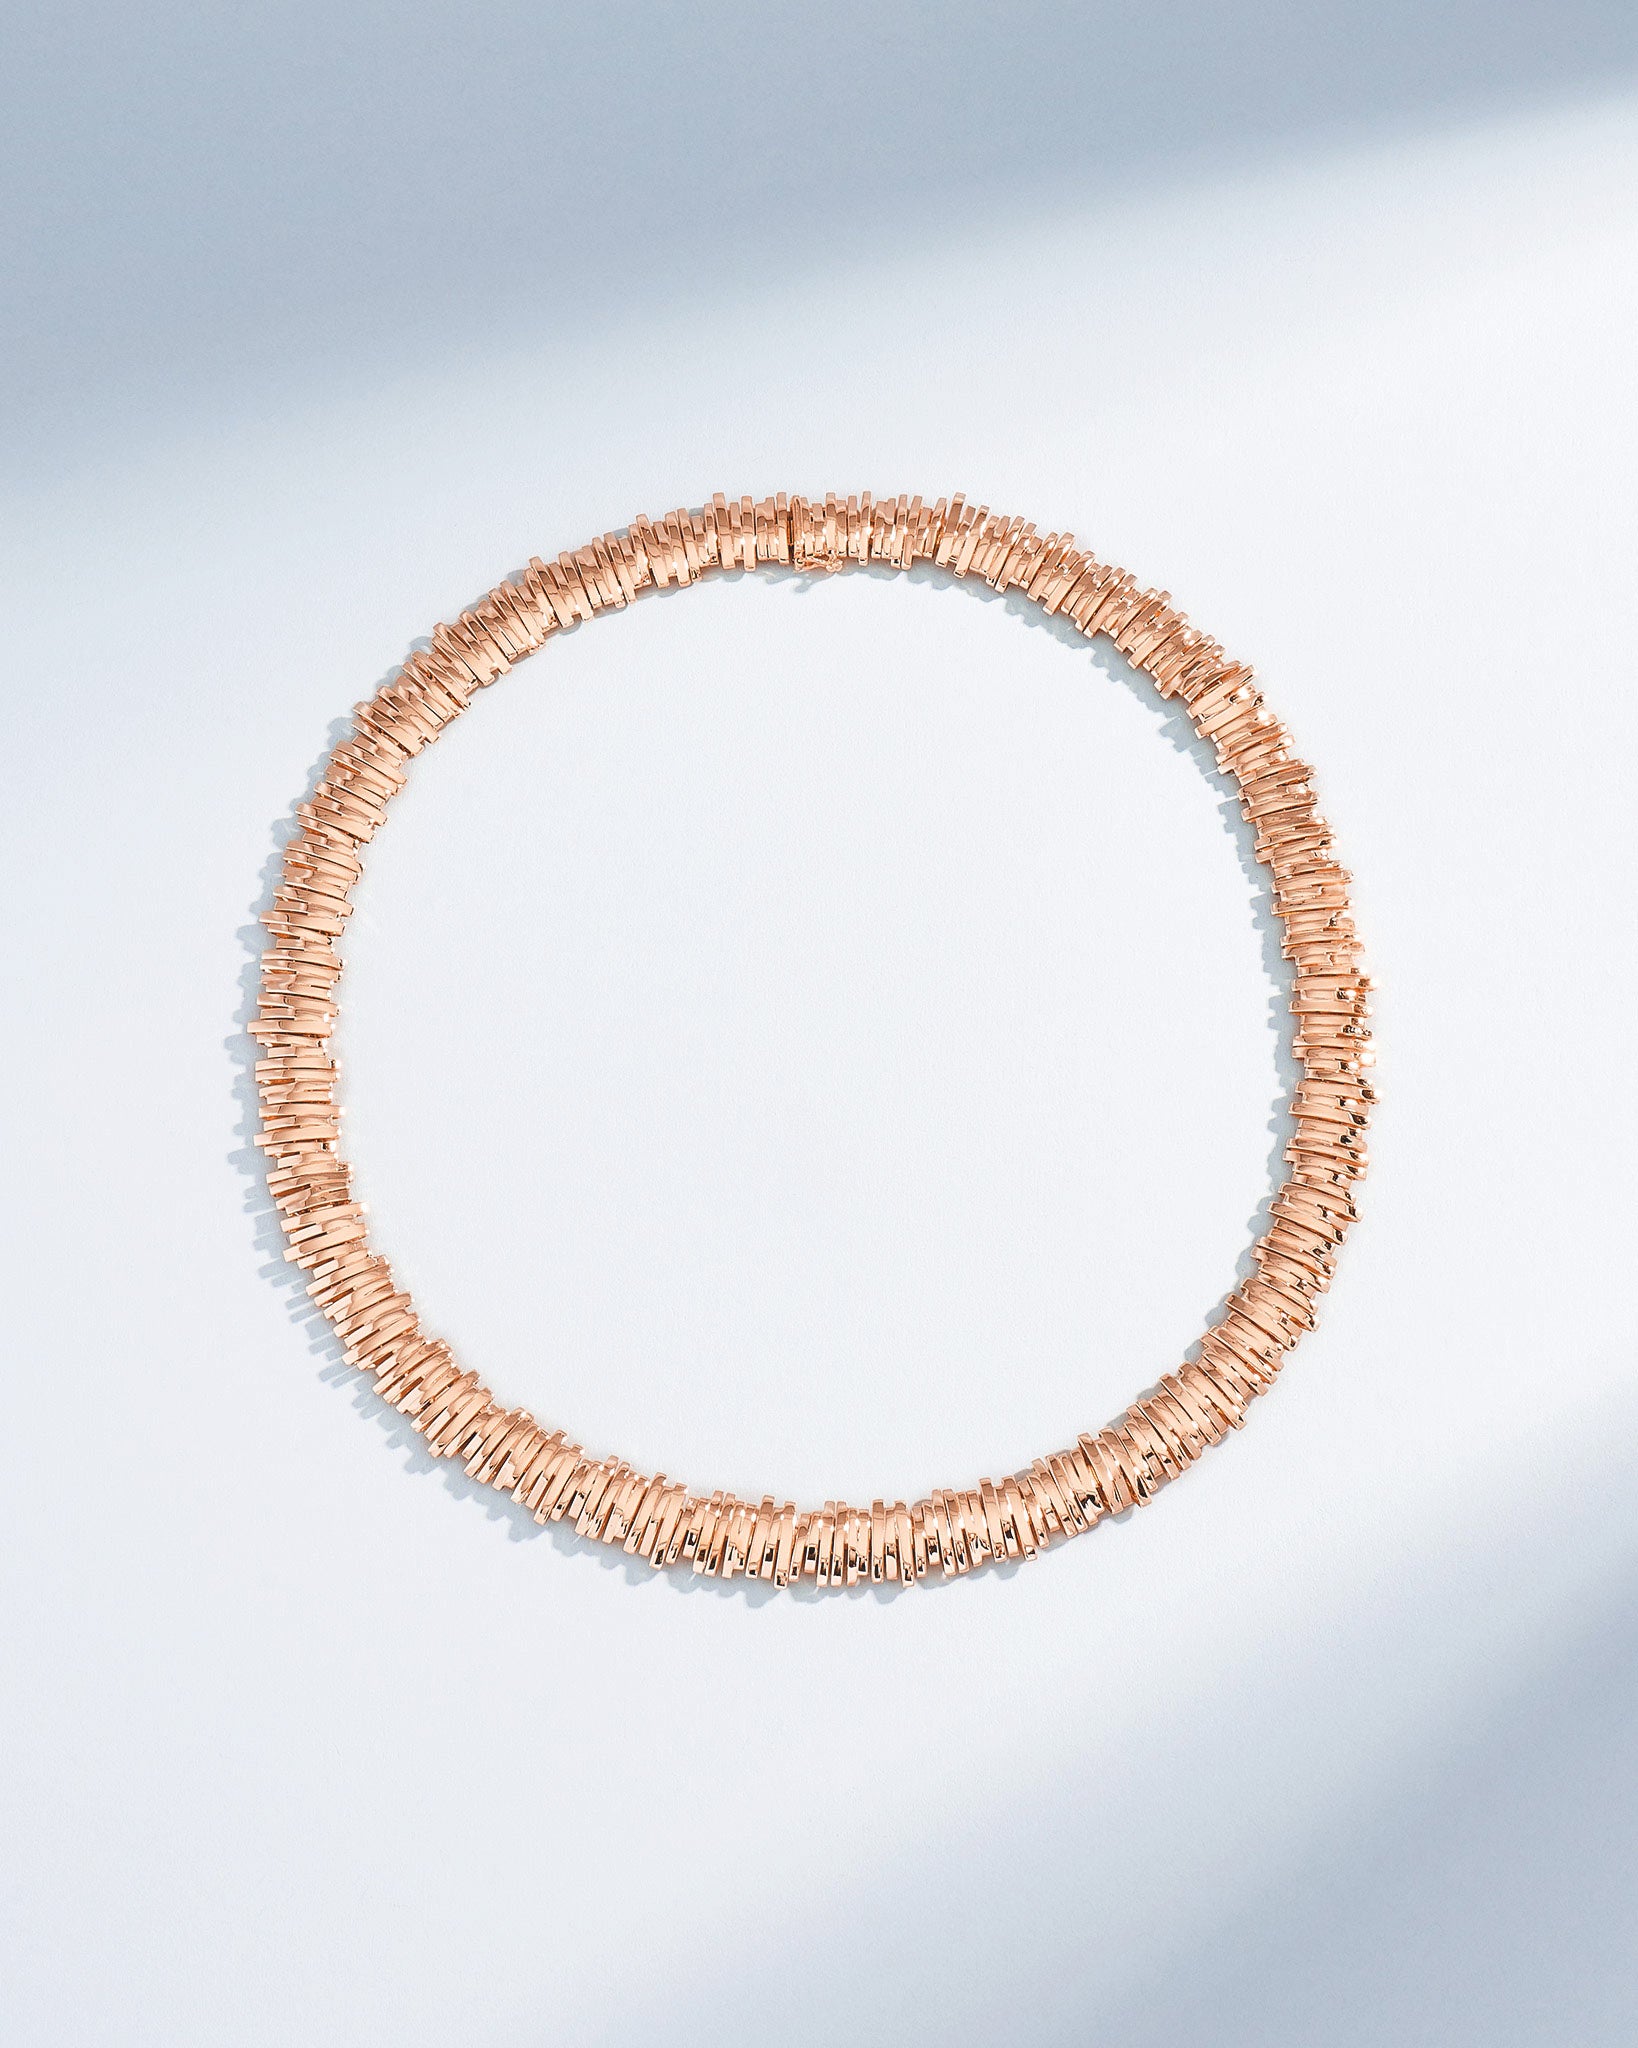 Suzanne Kalan Classic Gold Tennis Necklace in 18k rose gold